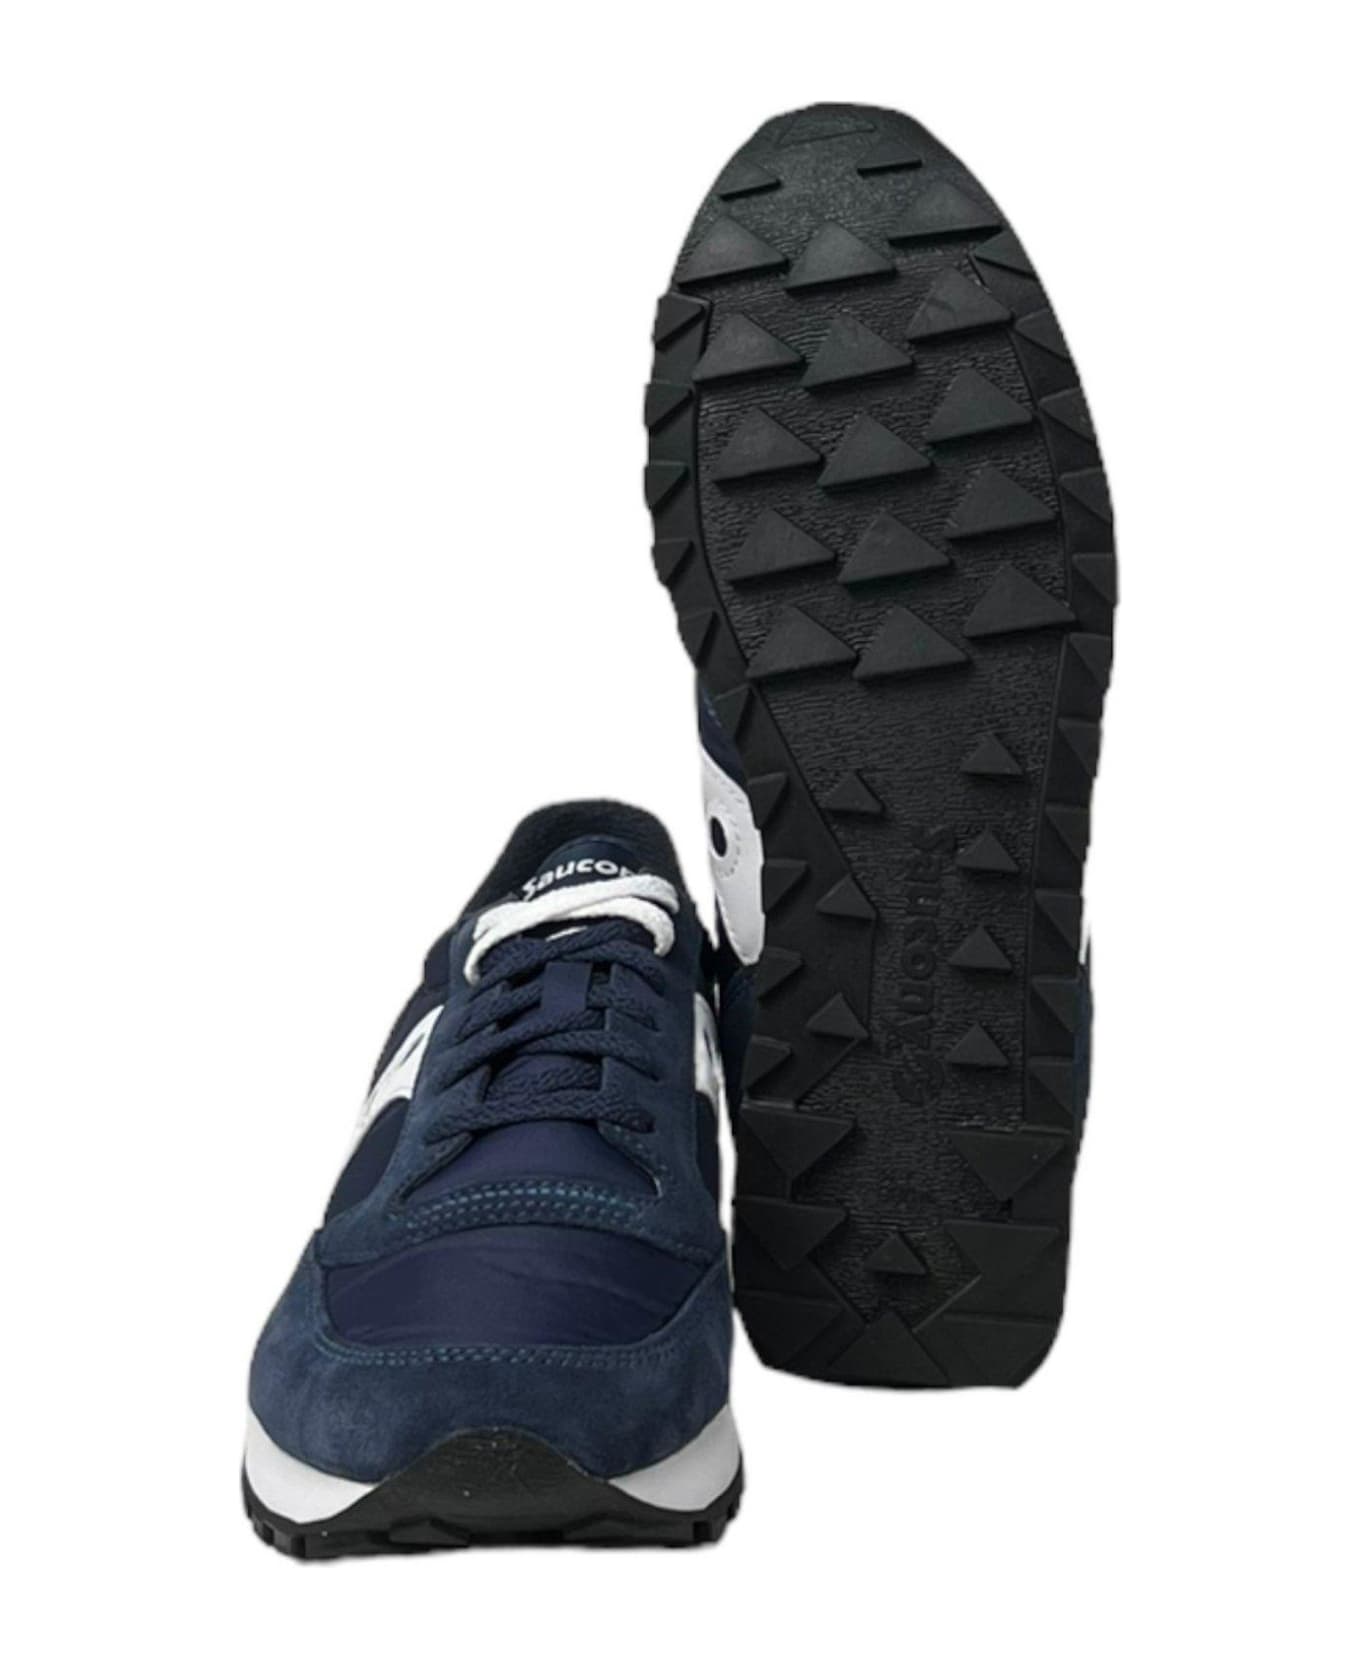 Saucony Jazz Original Lace-up Sneakers - Navy/white